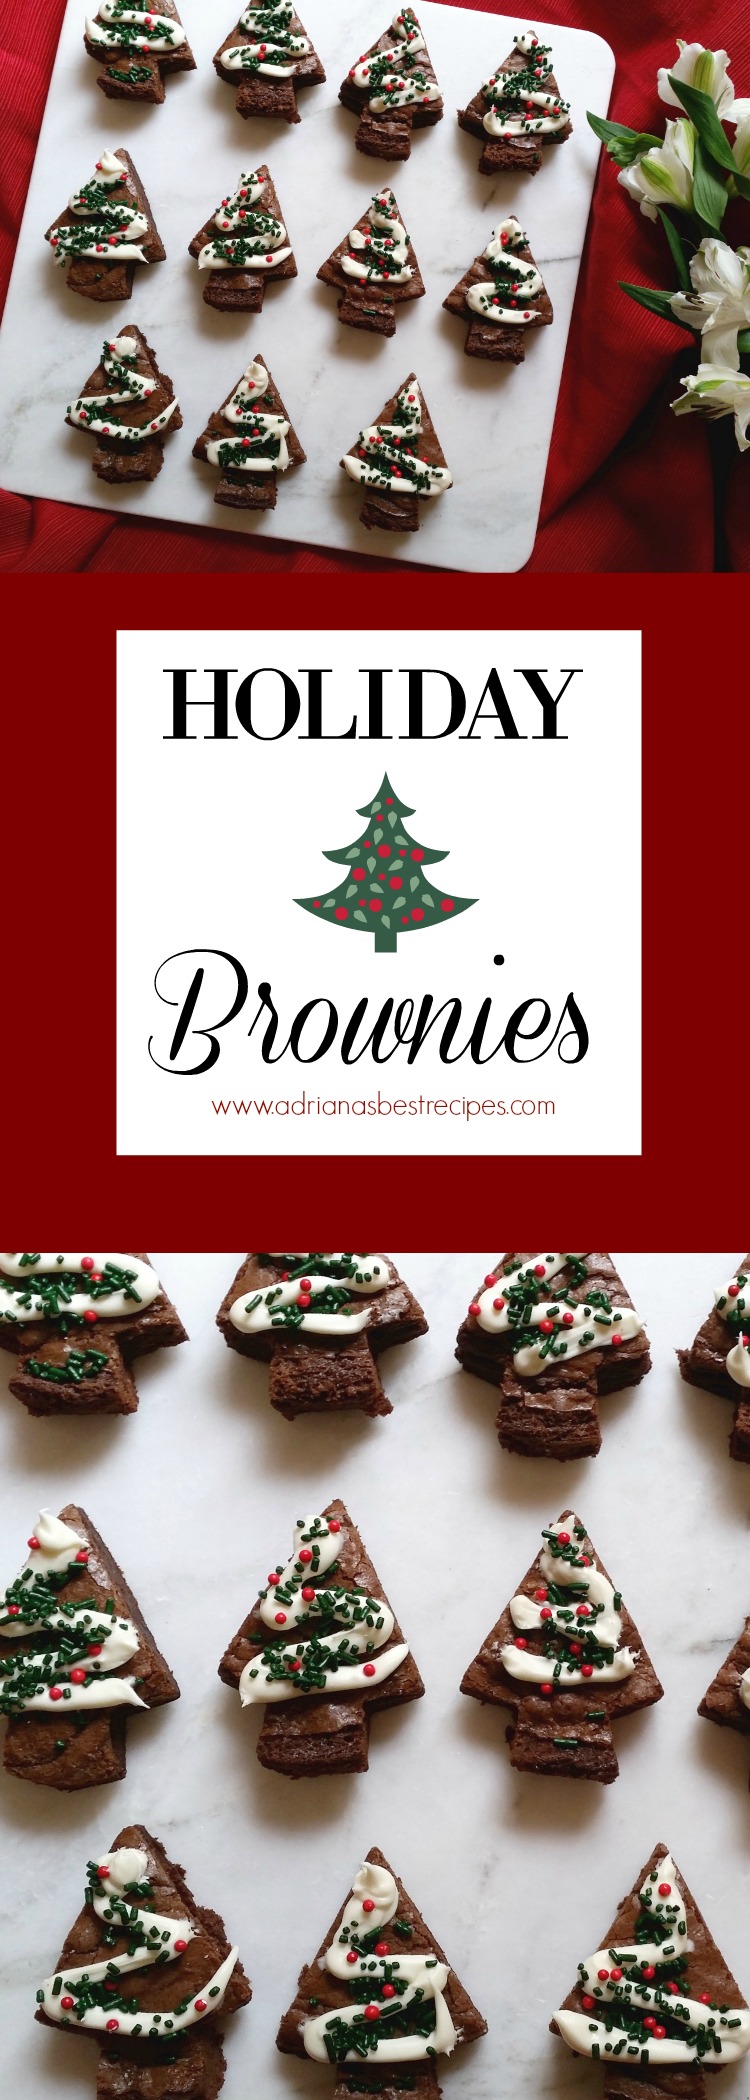 Holiday Brownies made easy with ingredients found at the local supermarket. Hassle free treat for entertaining at home and satisfy those with sweet tooth